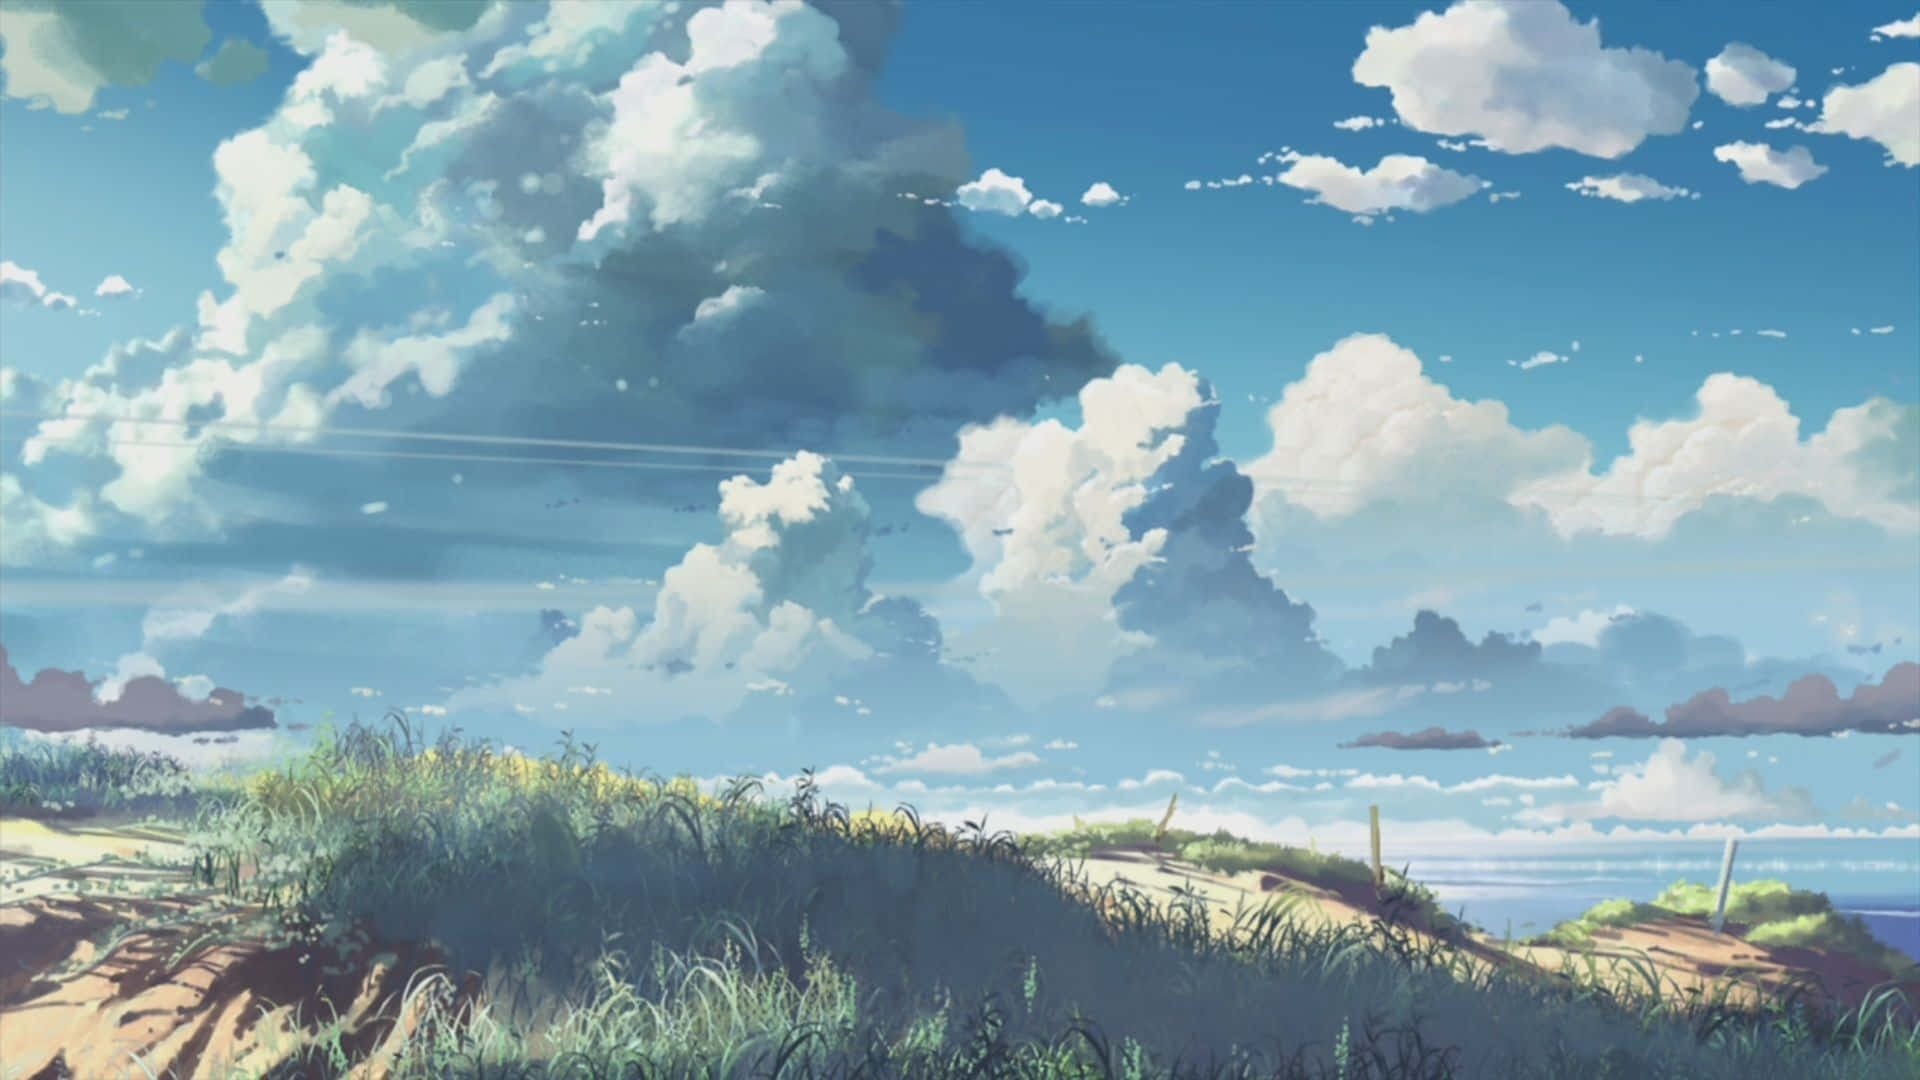 Image  A Mystical Landscape from the Naruto Franchise Wallpaper